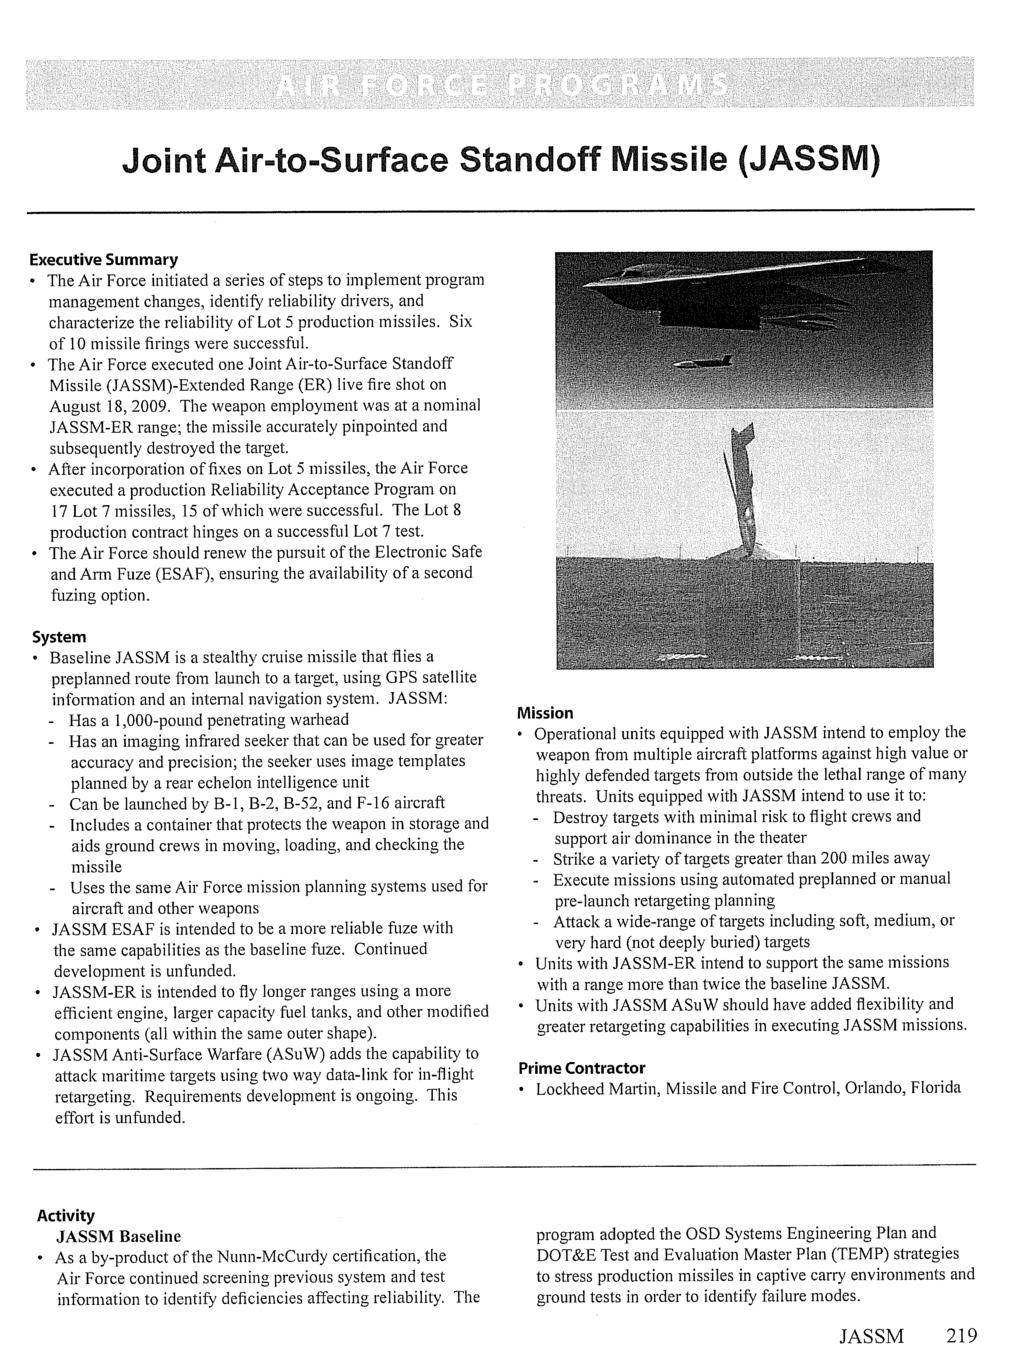 JASSM 219 Joint Air-to-Surface Standoff Missile (JASSM) Executive Summary The Air Force initiated a series of steps to implement program management changes, identify reliability drivers, and